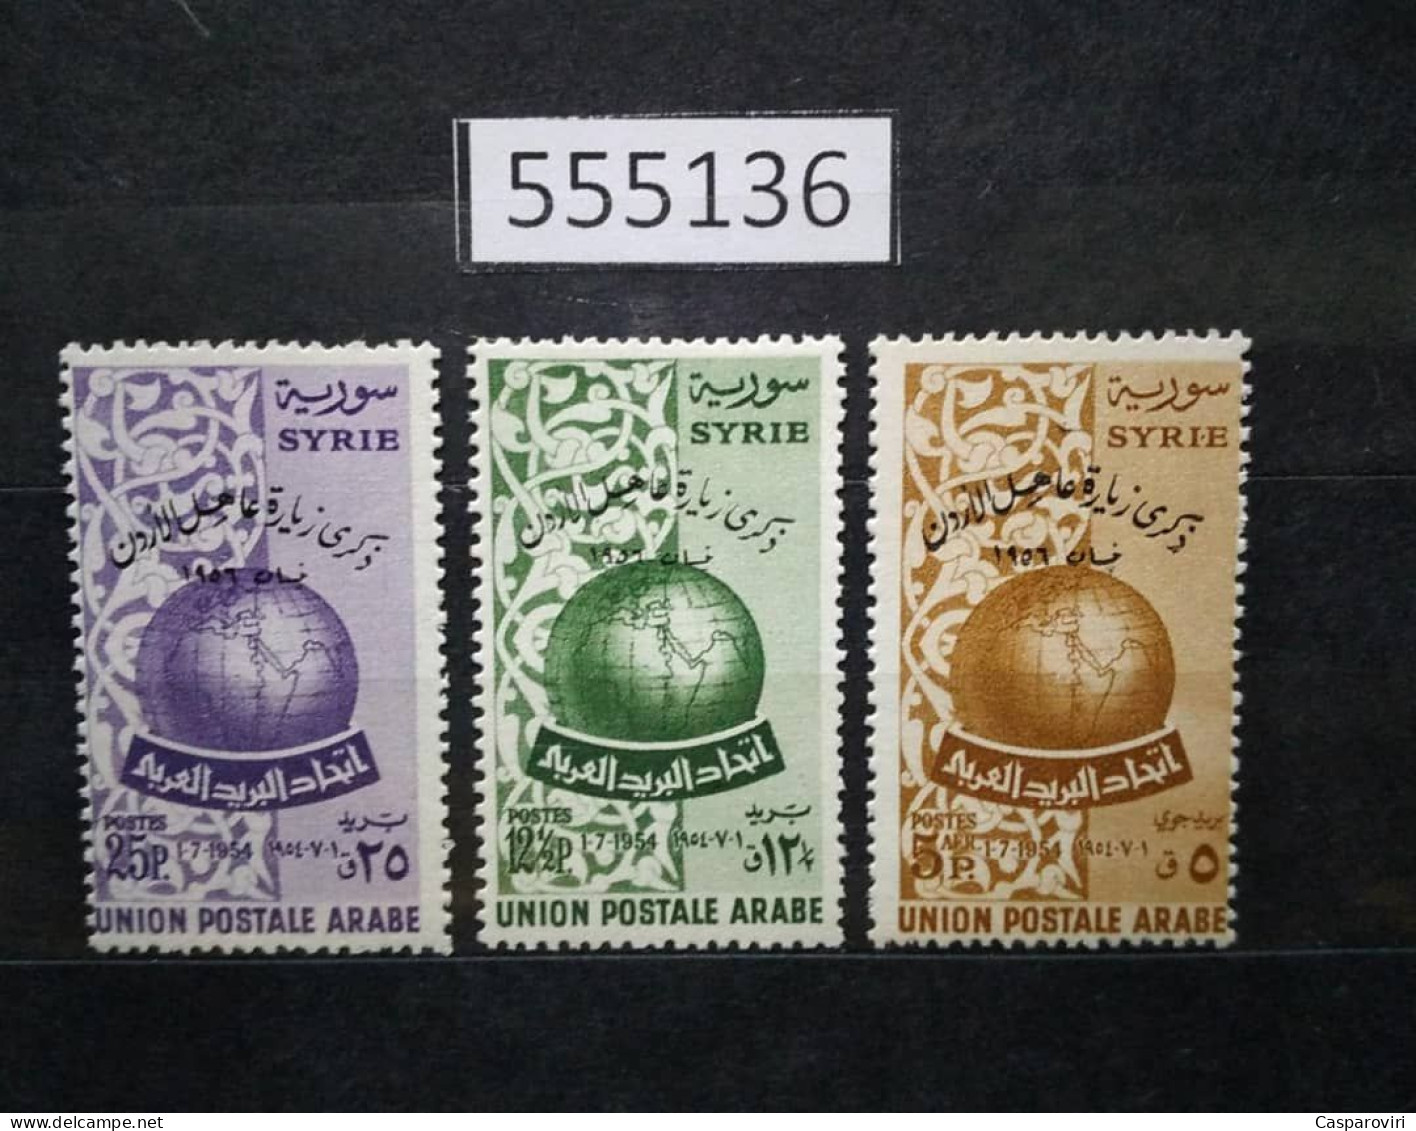 555136; Syria; 1956; Globe And Arabesque; Ovpt. Visit Of King Hussein Of Jordan To Damascus; GB 680 - 682; MNH** - Syria